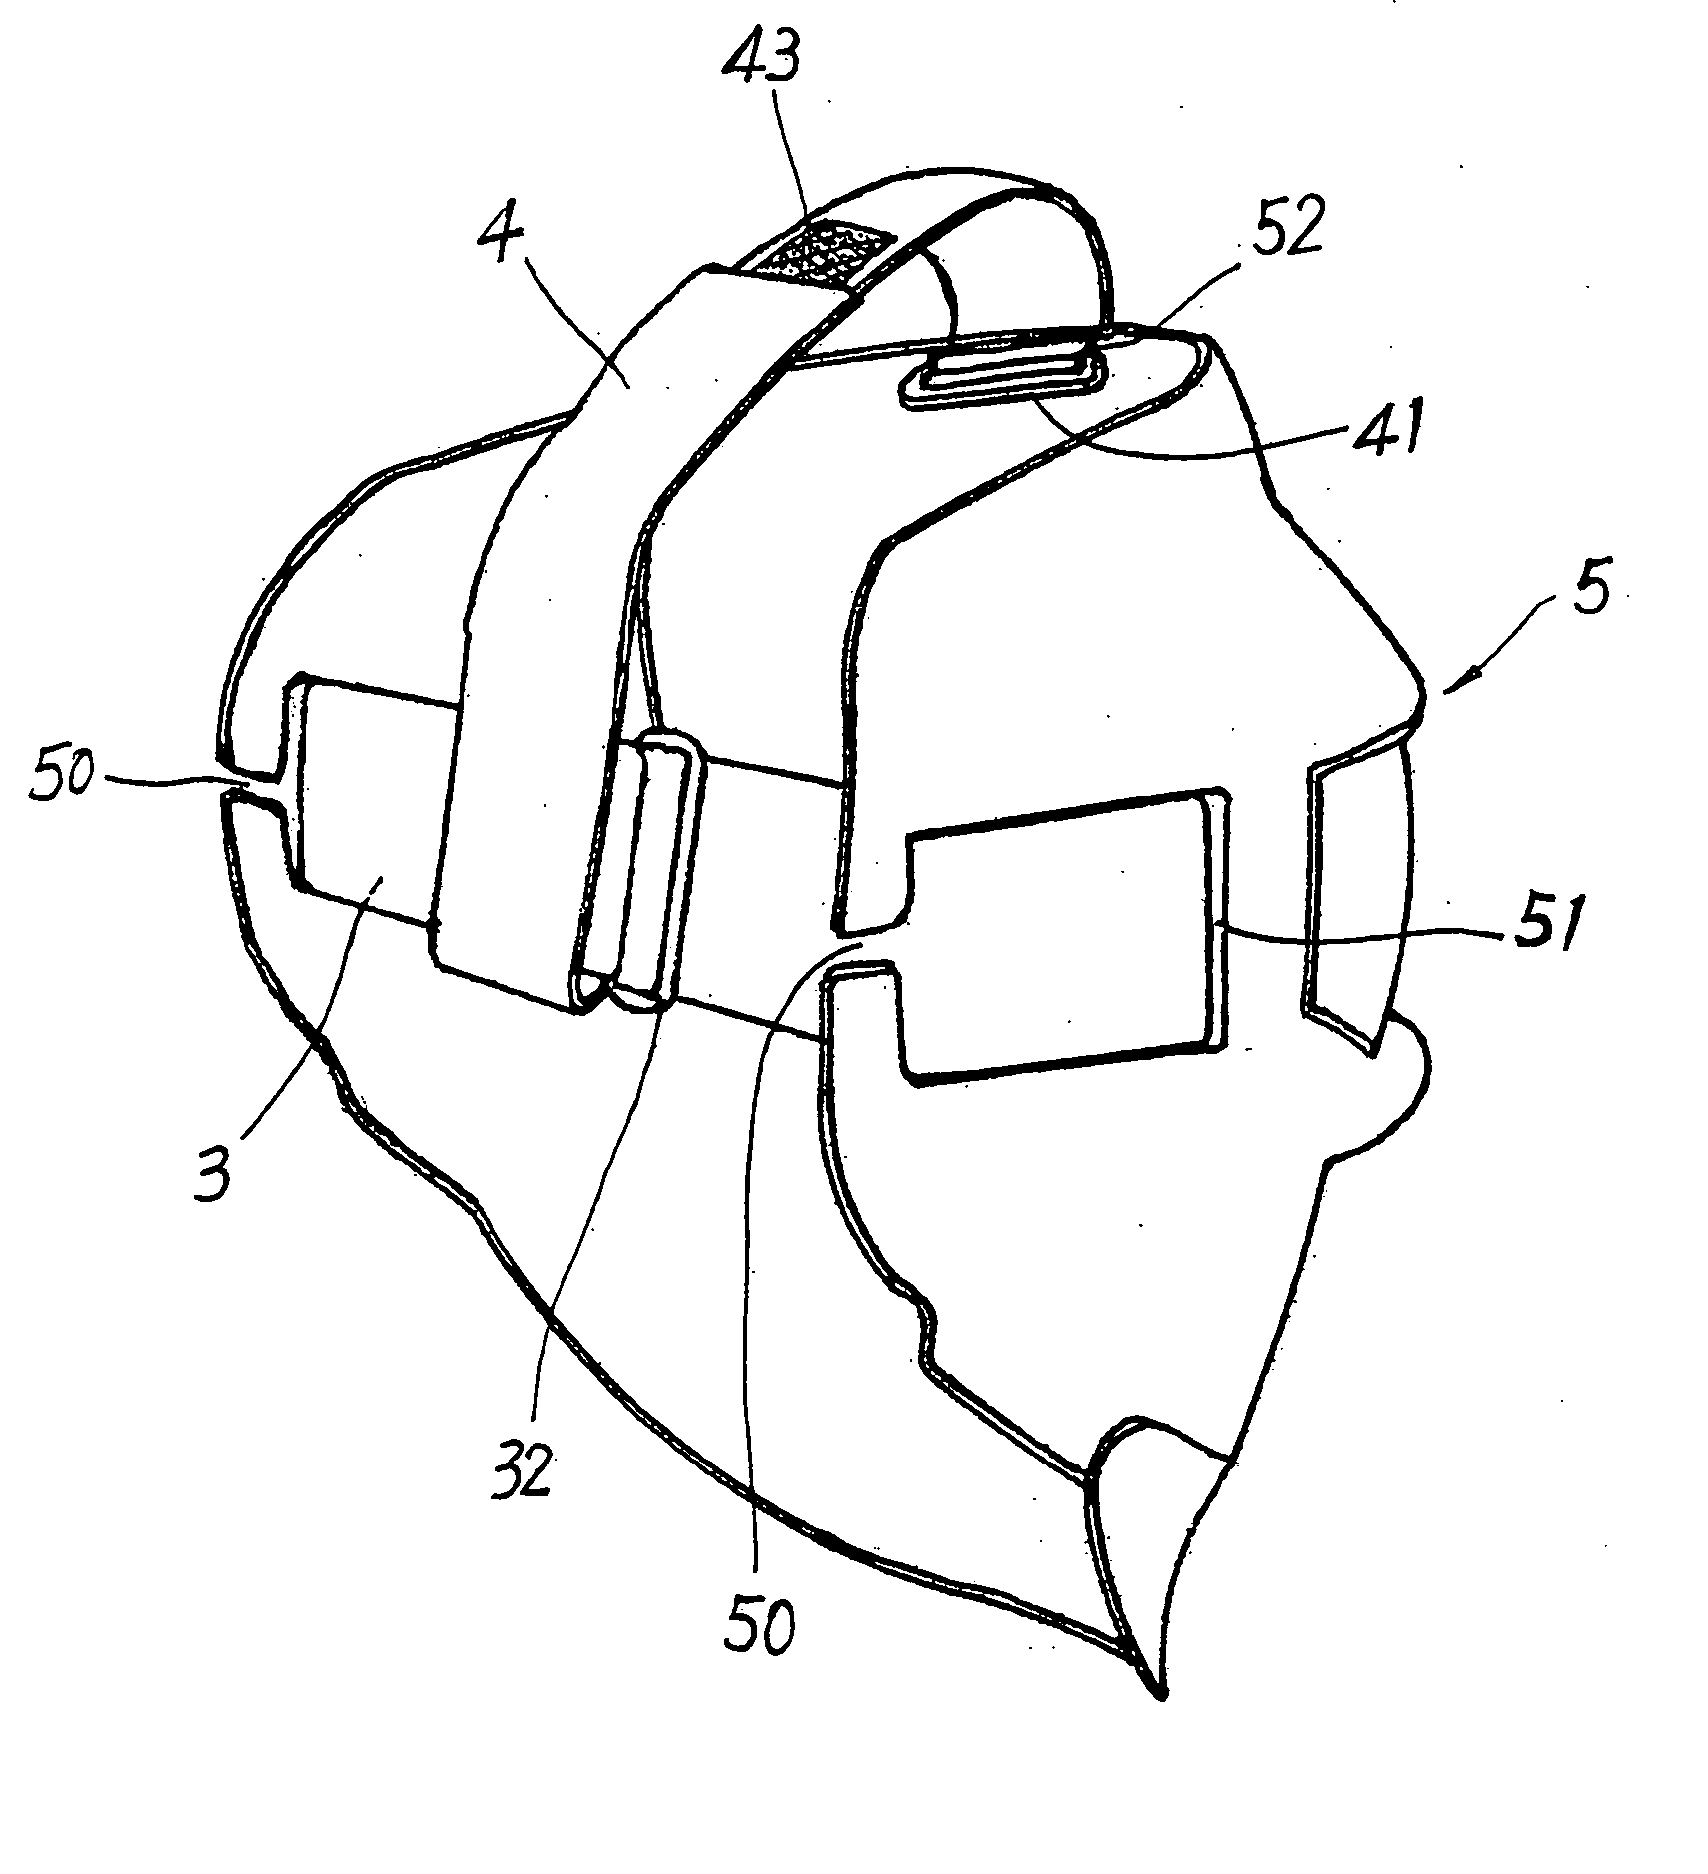 Face mask fit on user's head snugly